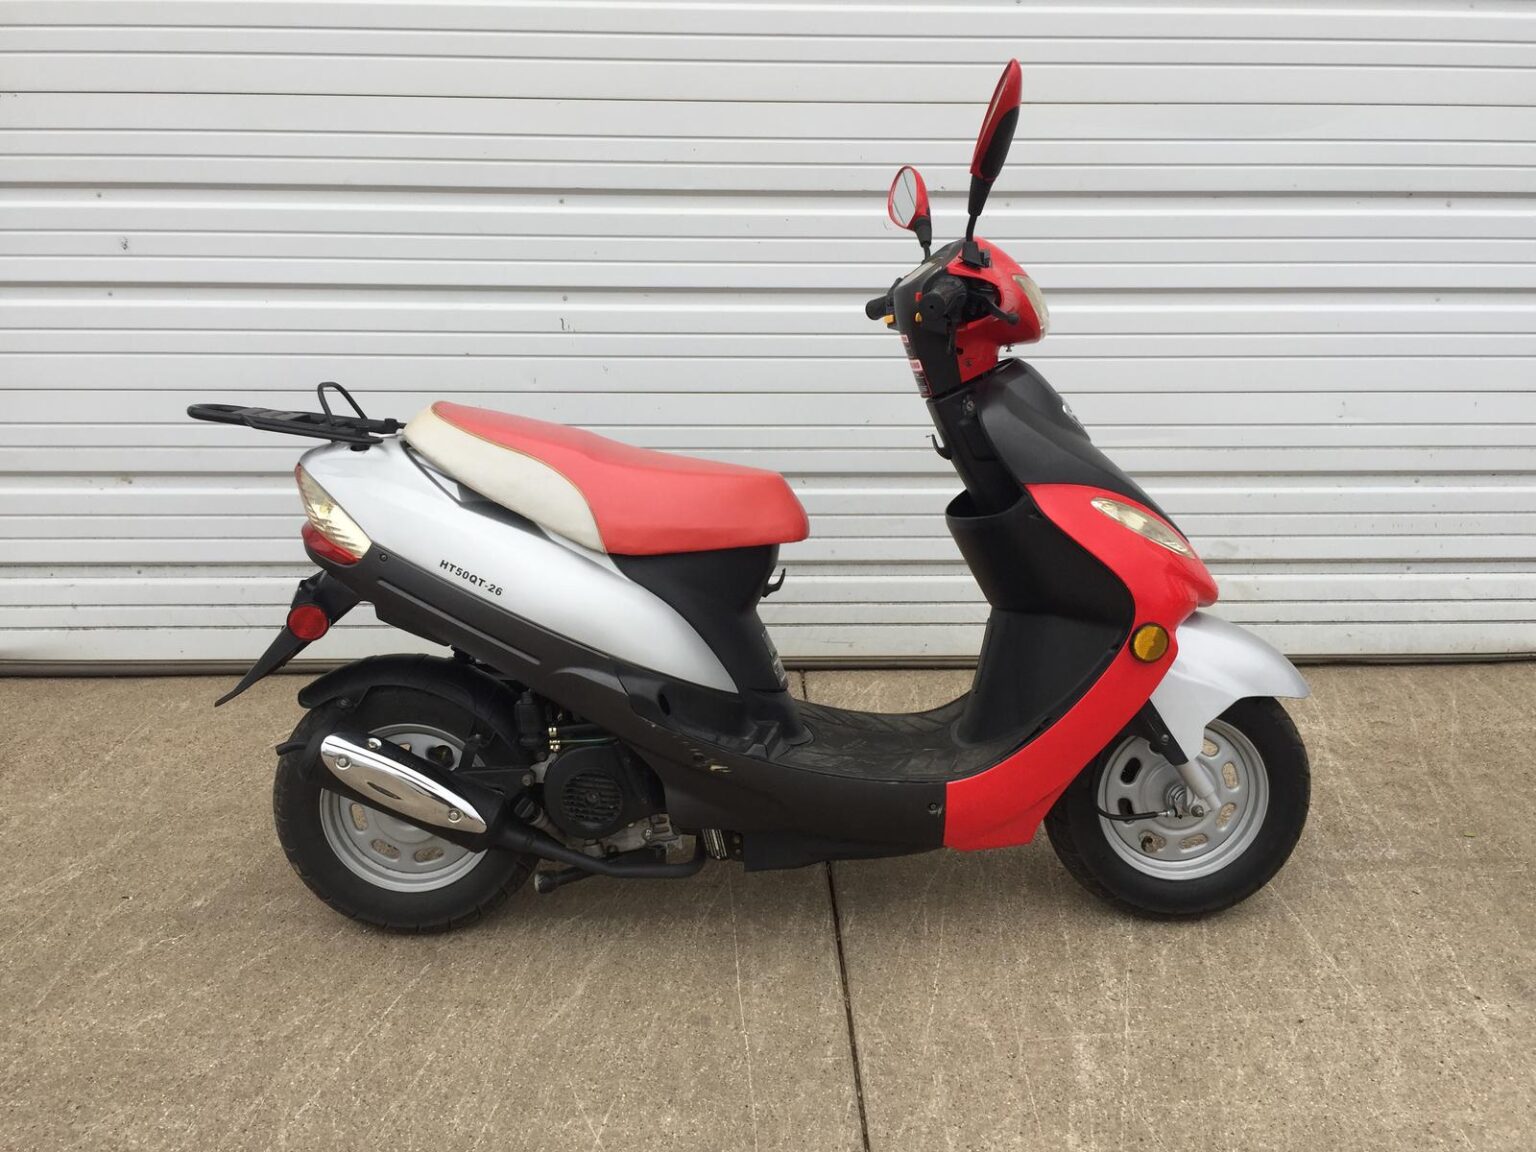 Considering alternatives to a motorcycle? Why not try a good scooter? Discover what to look for when buying a scooter so you can make a great purchase!